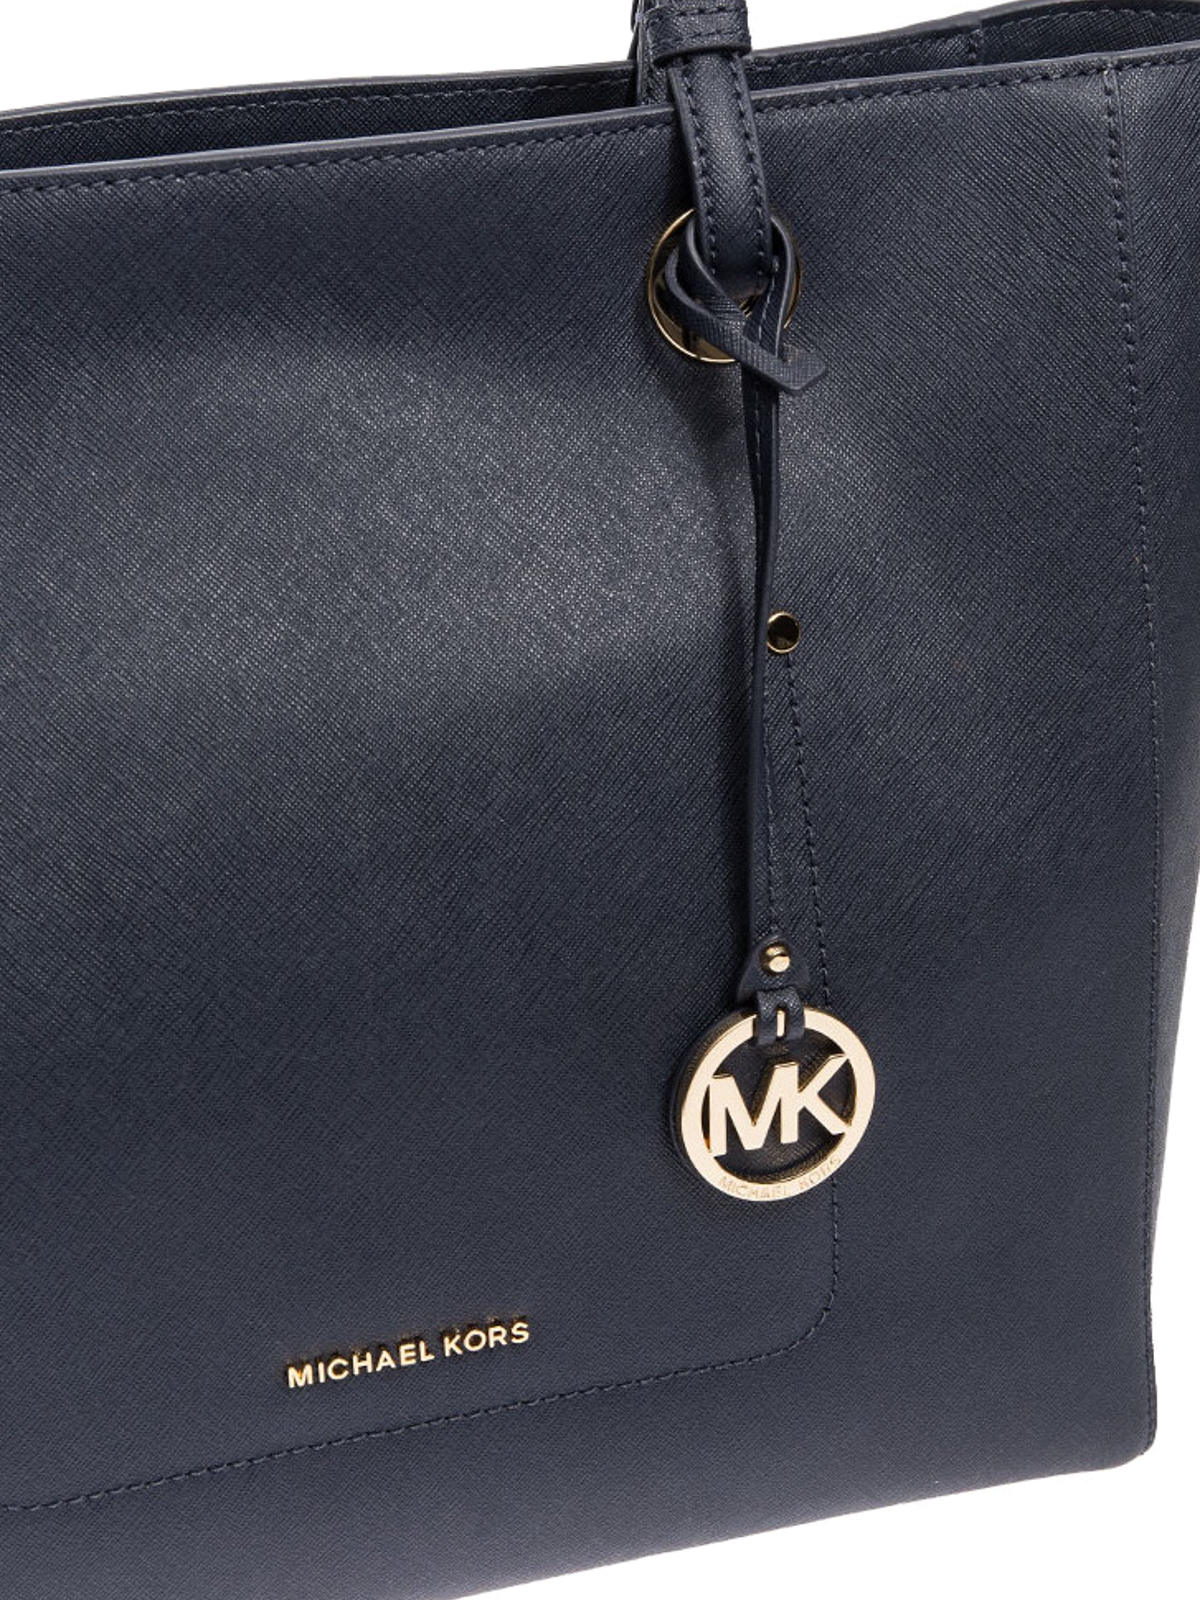 Michael Kors Women's Large Walsh Saffiano Leather Tote